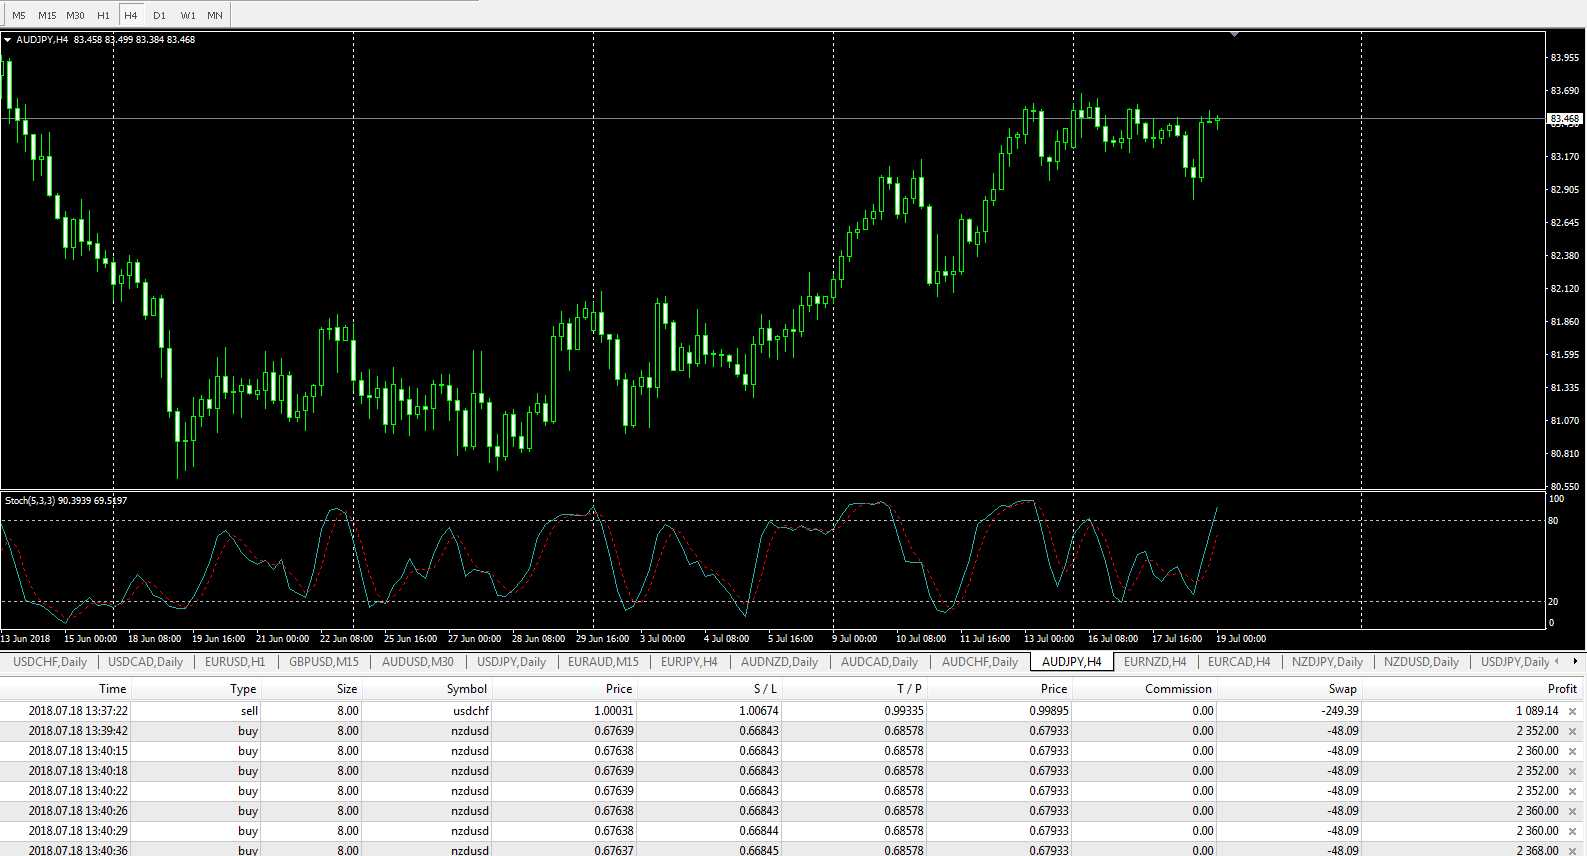 Ats assistant forex